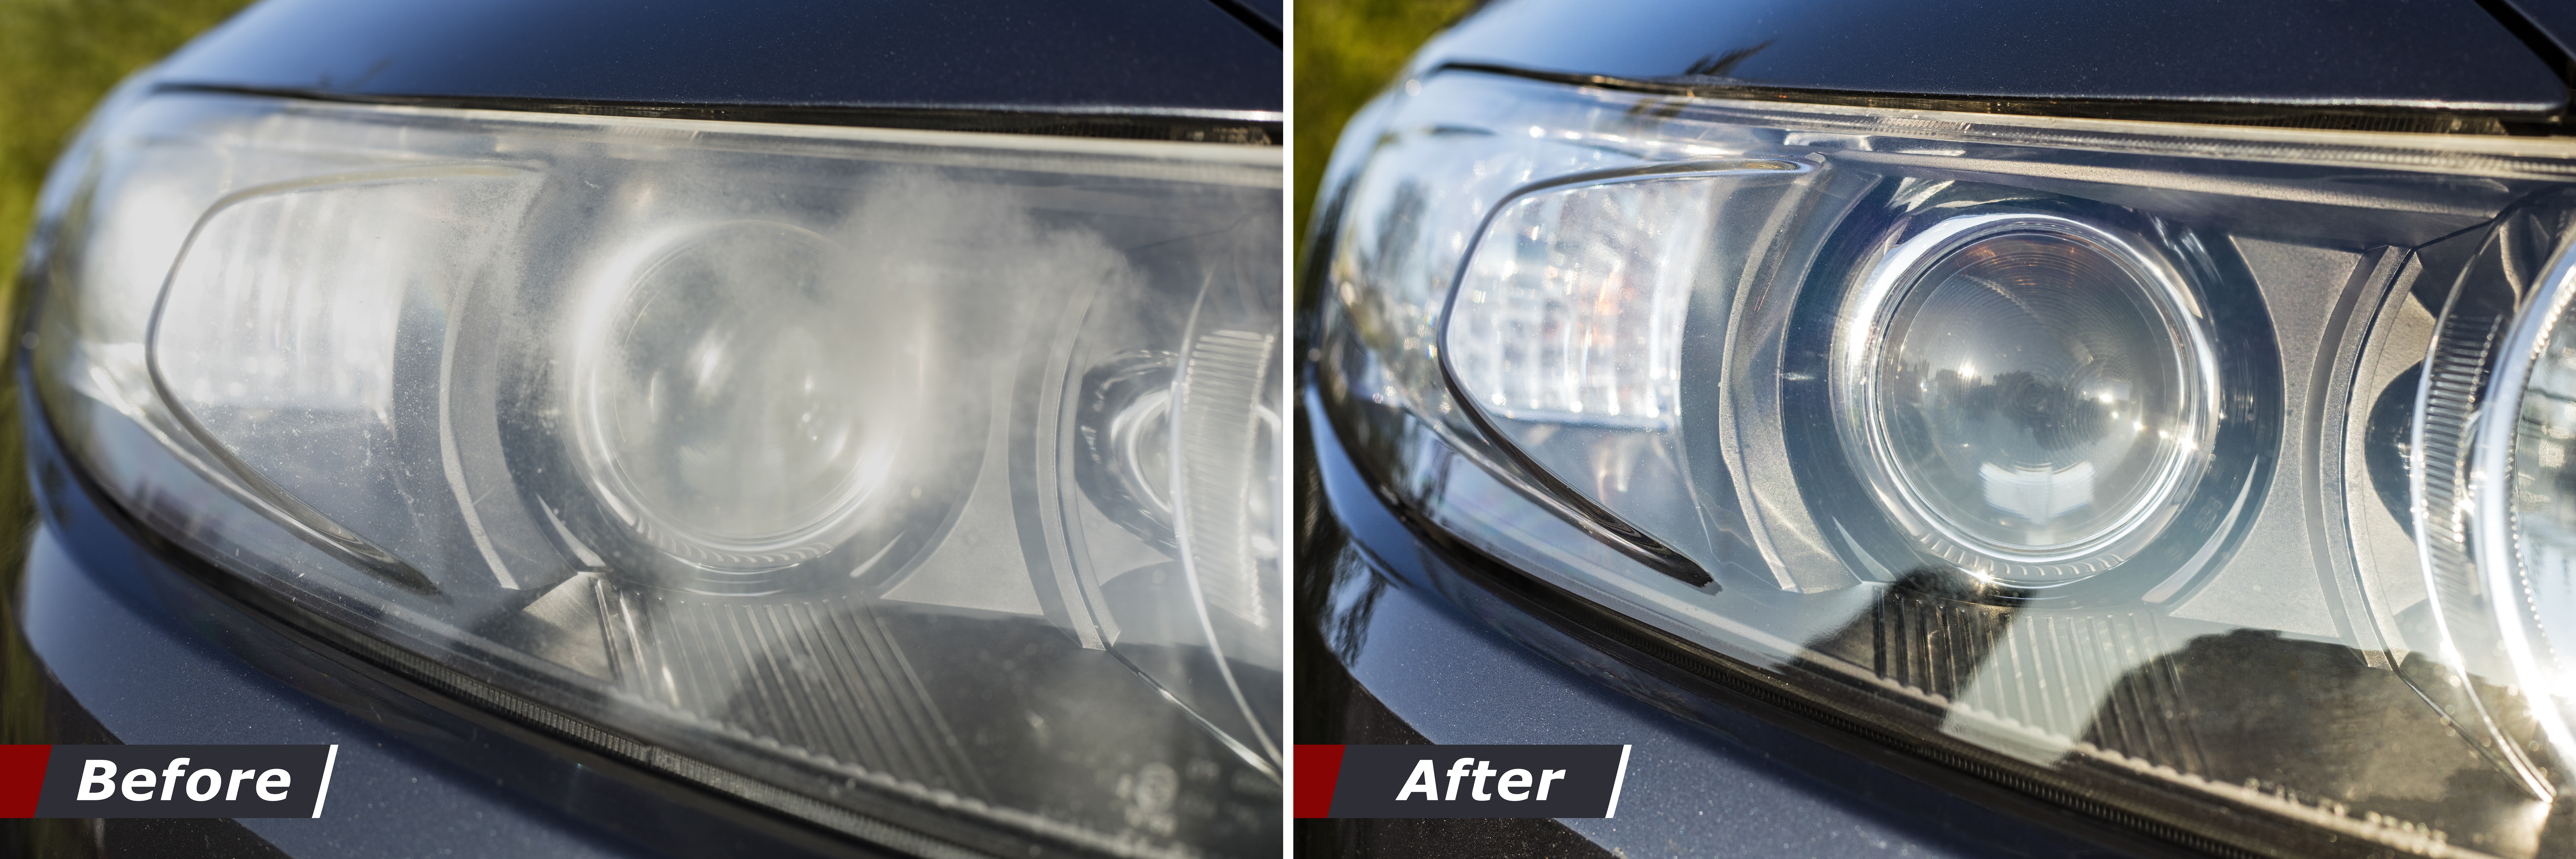 Before and after headlight polishing by bulldog detail